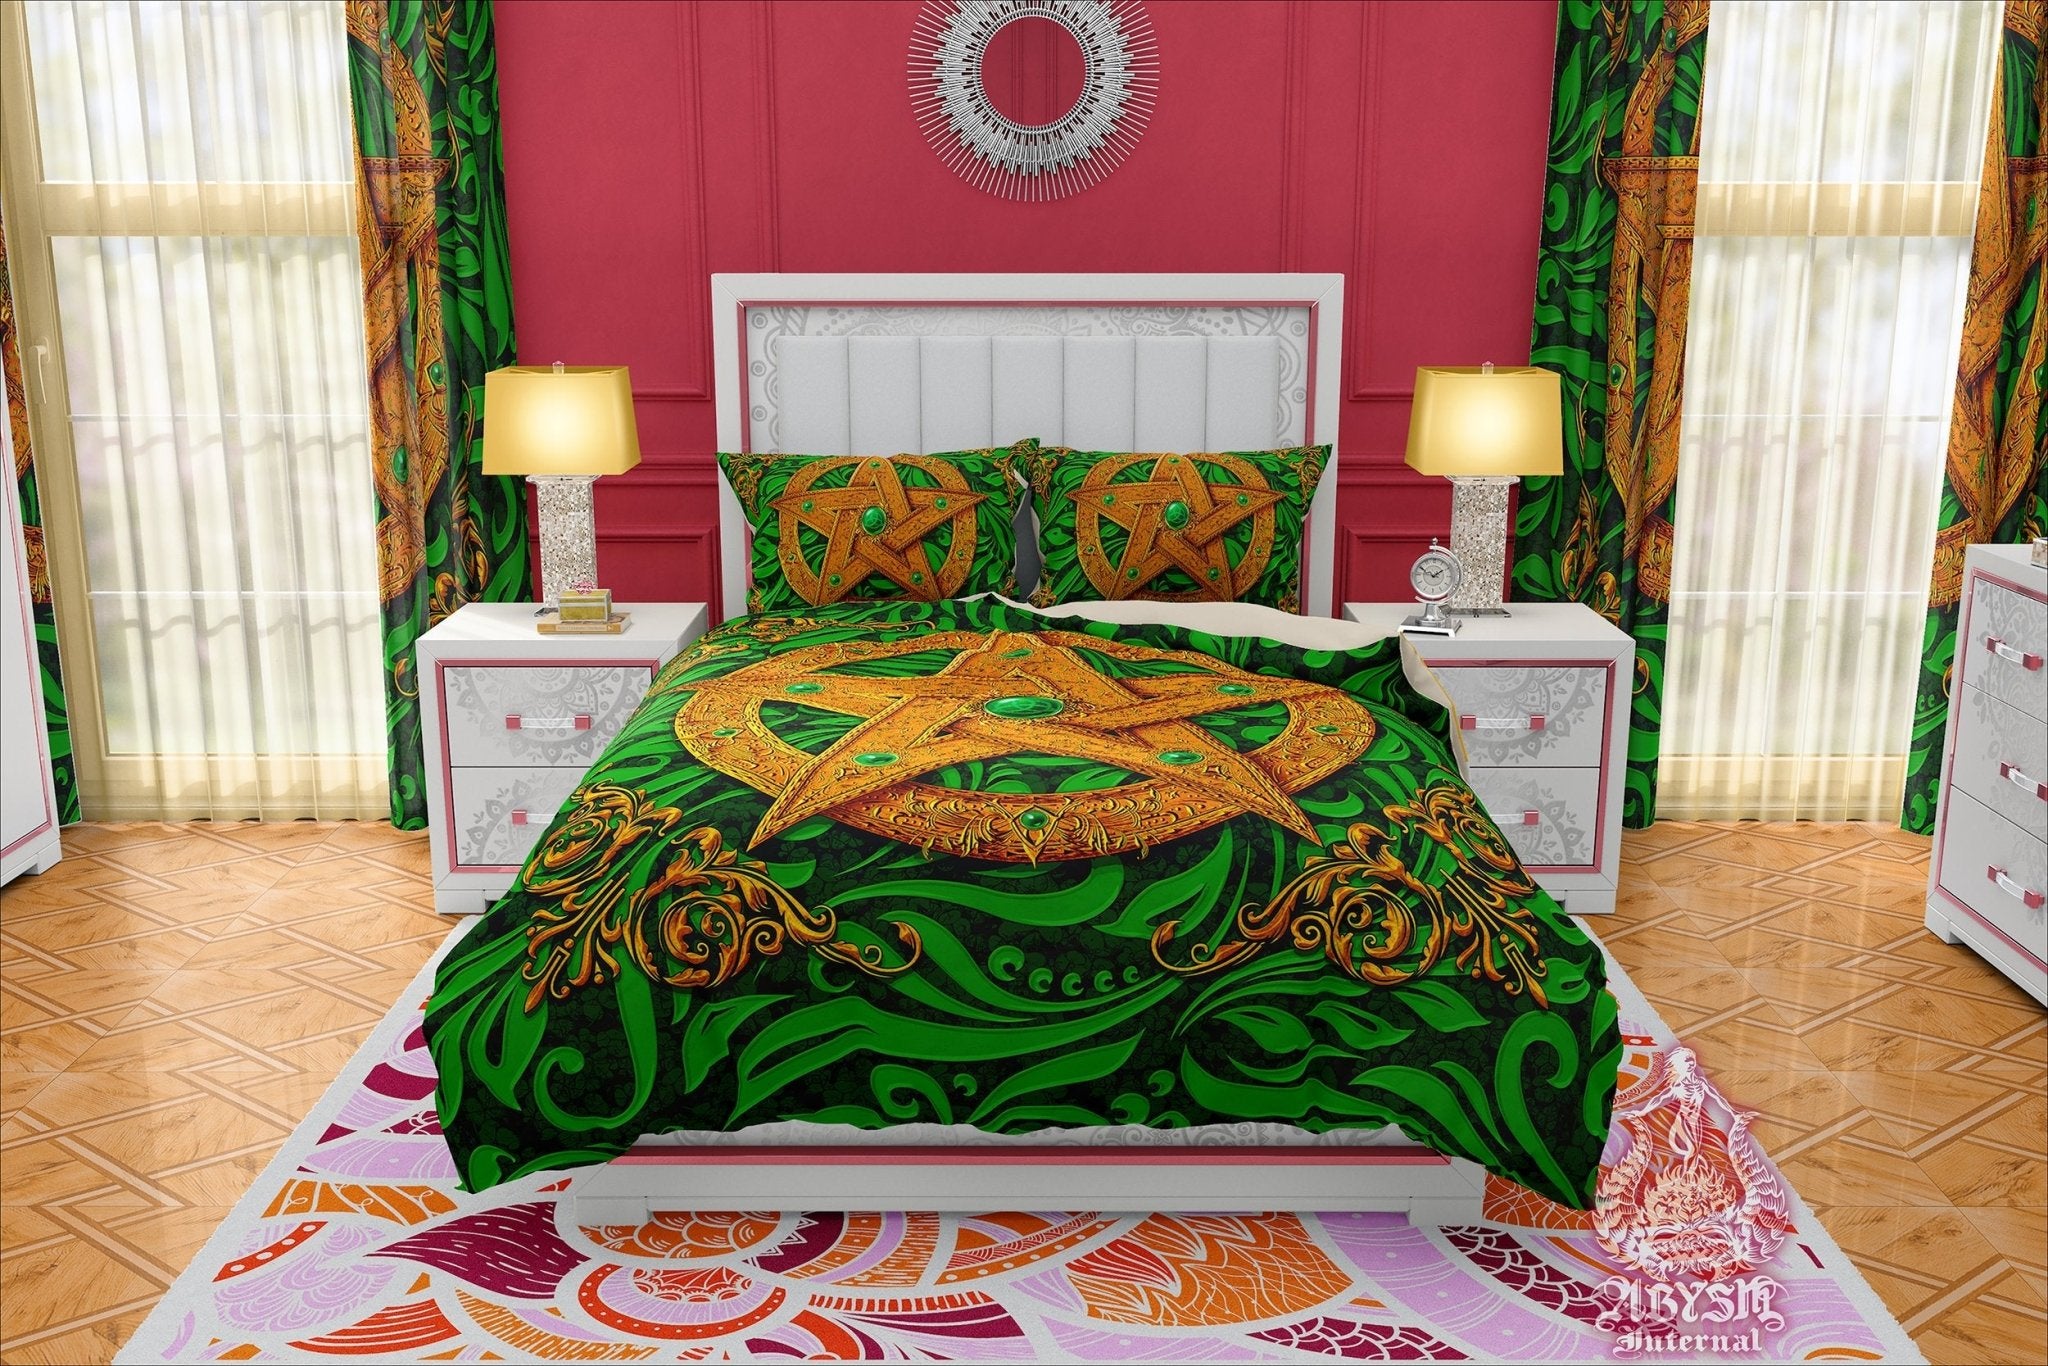 Pentacle Bedding Set, Comforter and Duvet, Wiccan Bed Cover and Witchy Bedroom Decor, King, Queen and Twin Size - 4 Colors - Abysm Internal